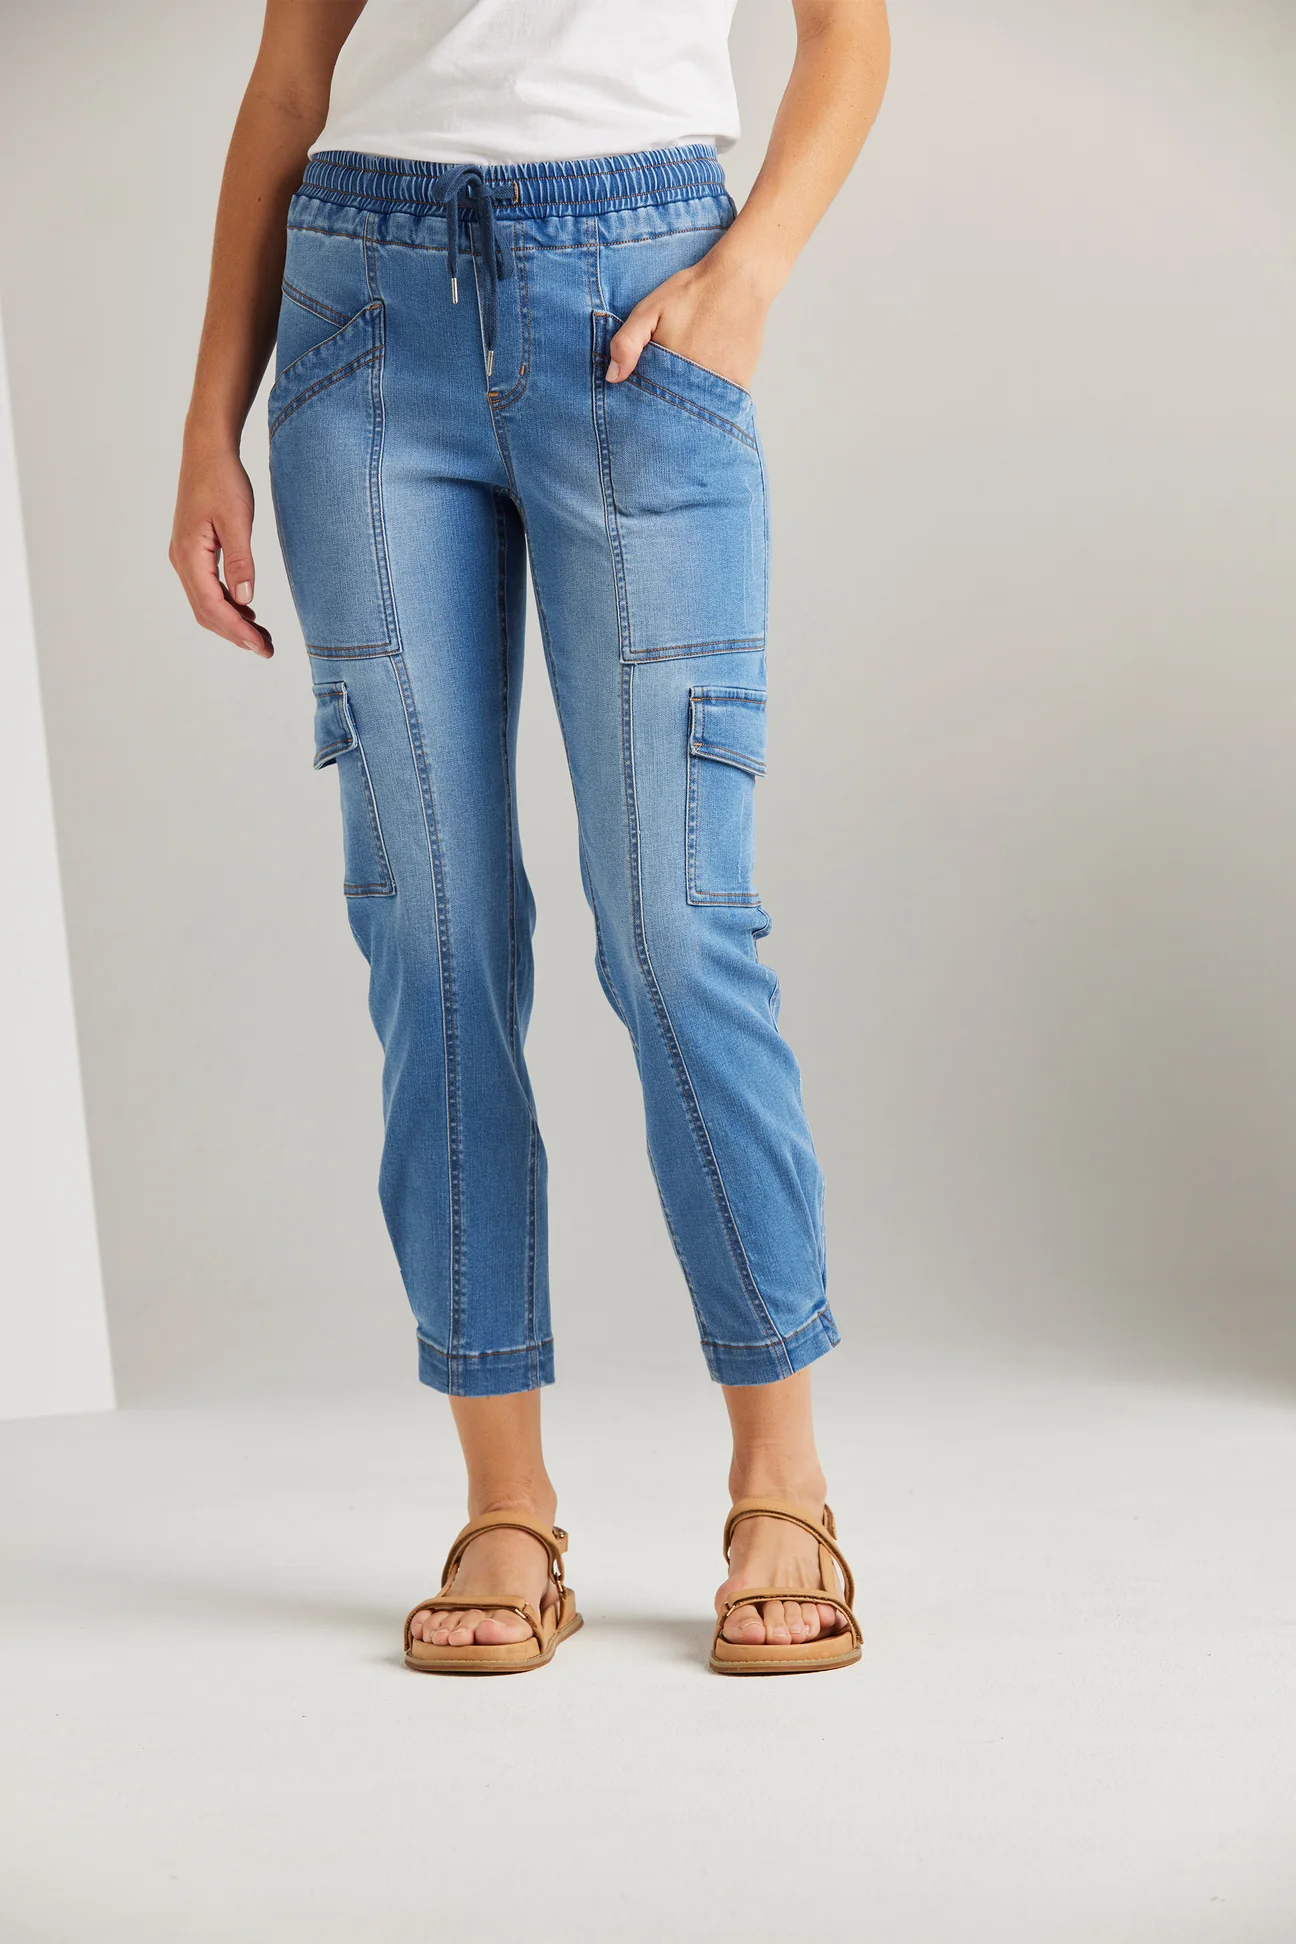 Lania The Label Tyler Jean - Distressed